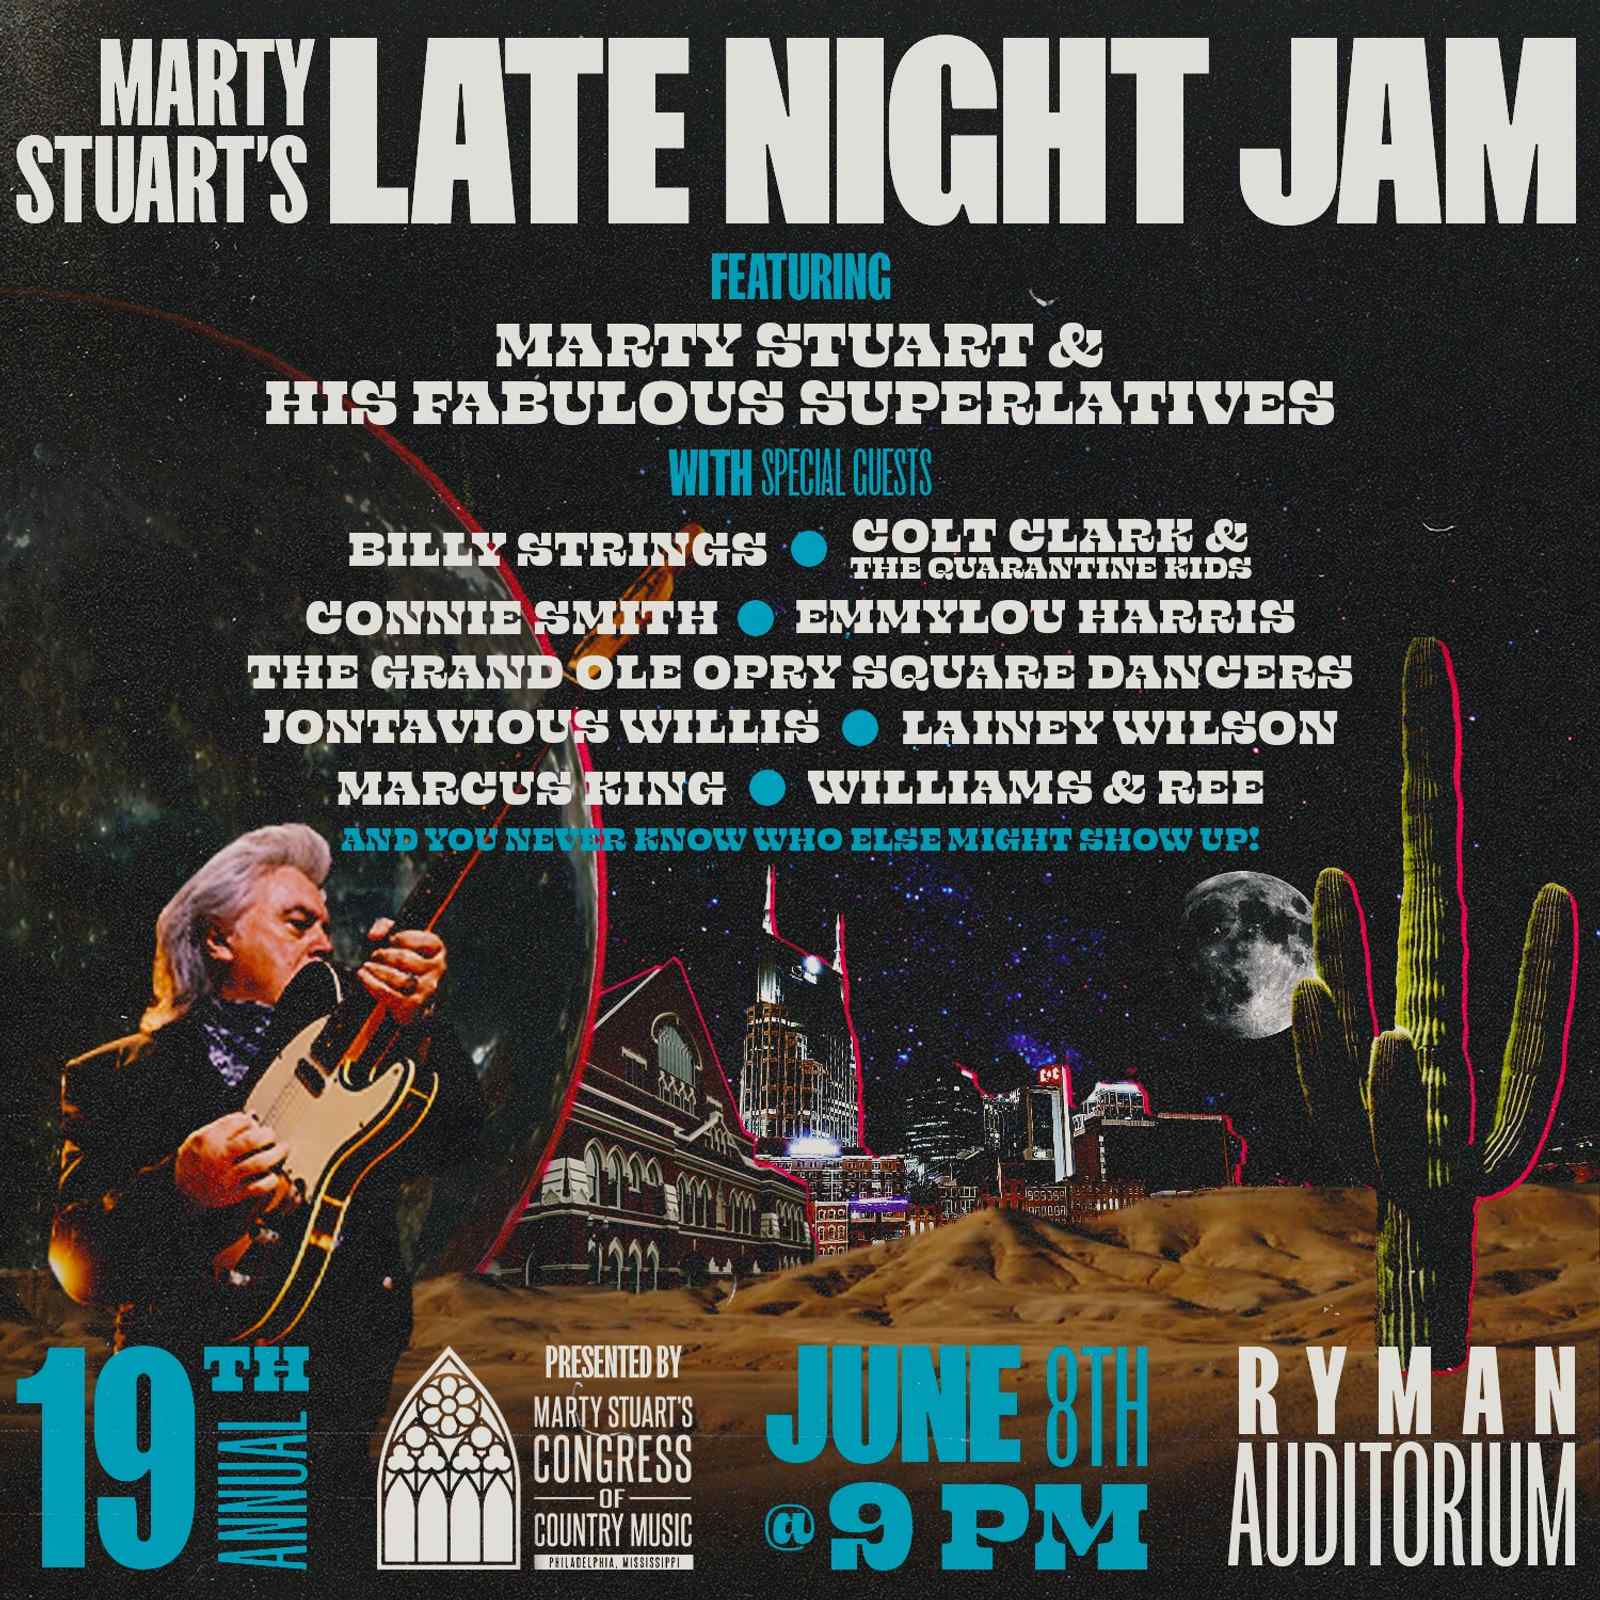 Marty Stuart’s Late Night Jam returns with Emmylou Harris, Billy Strings, Marcus King